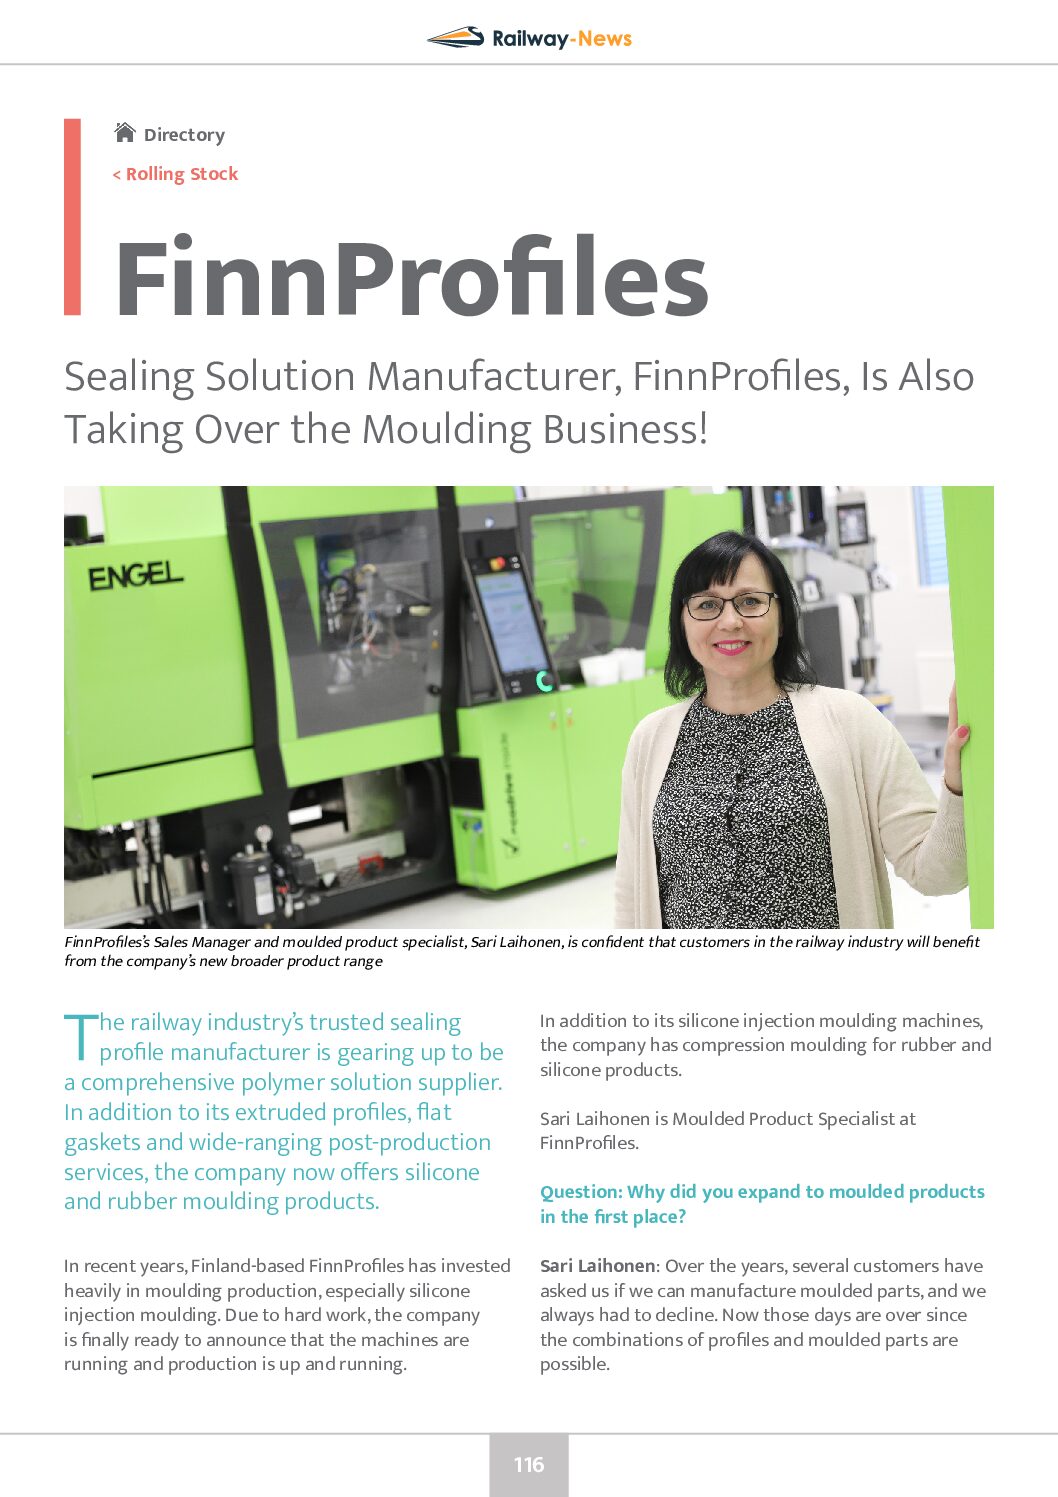 FinnProfiles Is Taking Over the Moulding Business